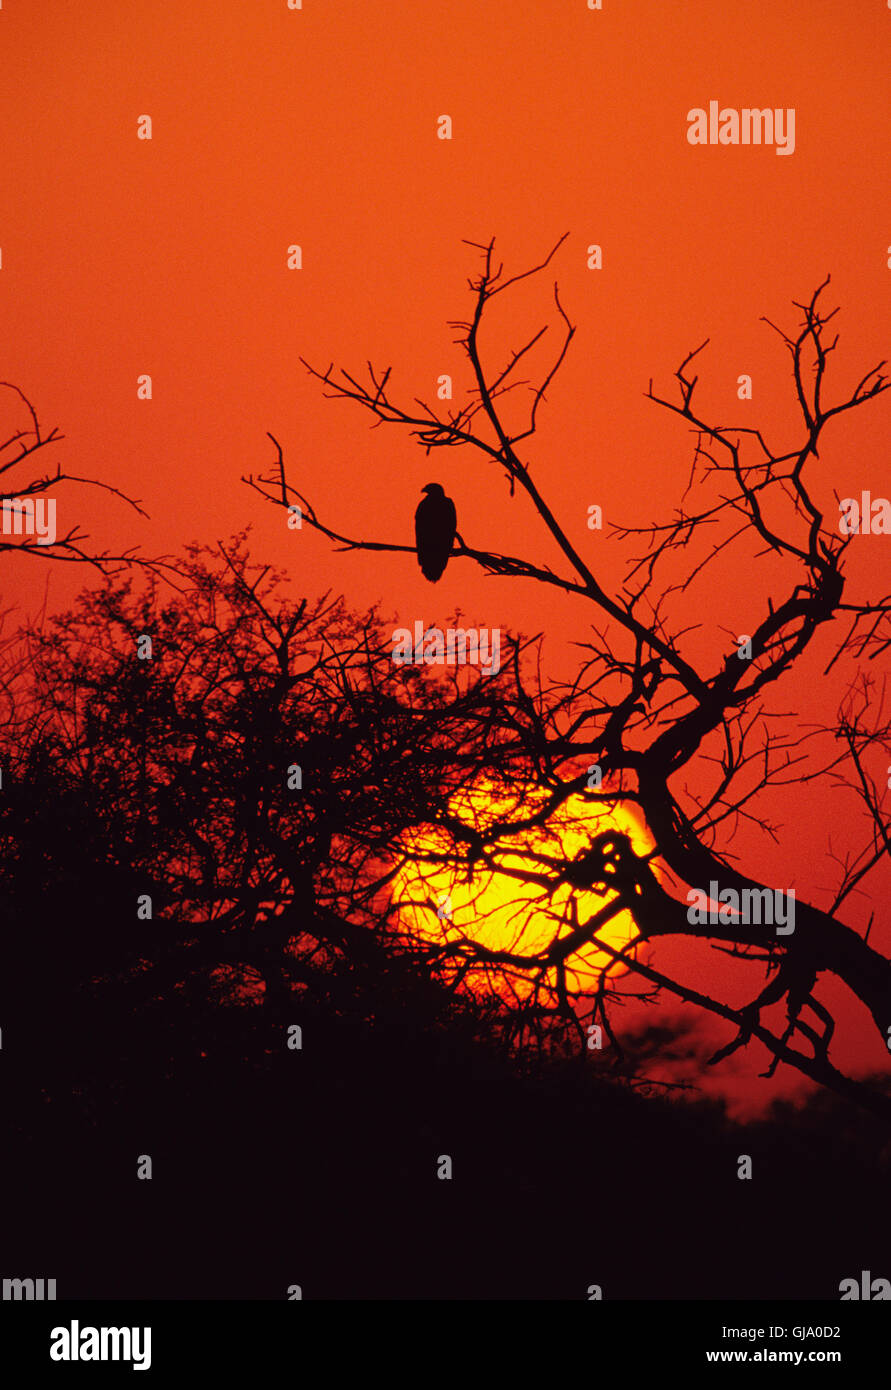 Steppe Eagle, Aquila nipalensis, silhouette at sunset with red sky, Keoladeo Ghana National Park, Bharatpur, Rajasthan, India Stock Photo